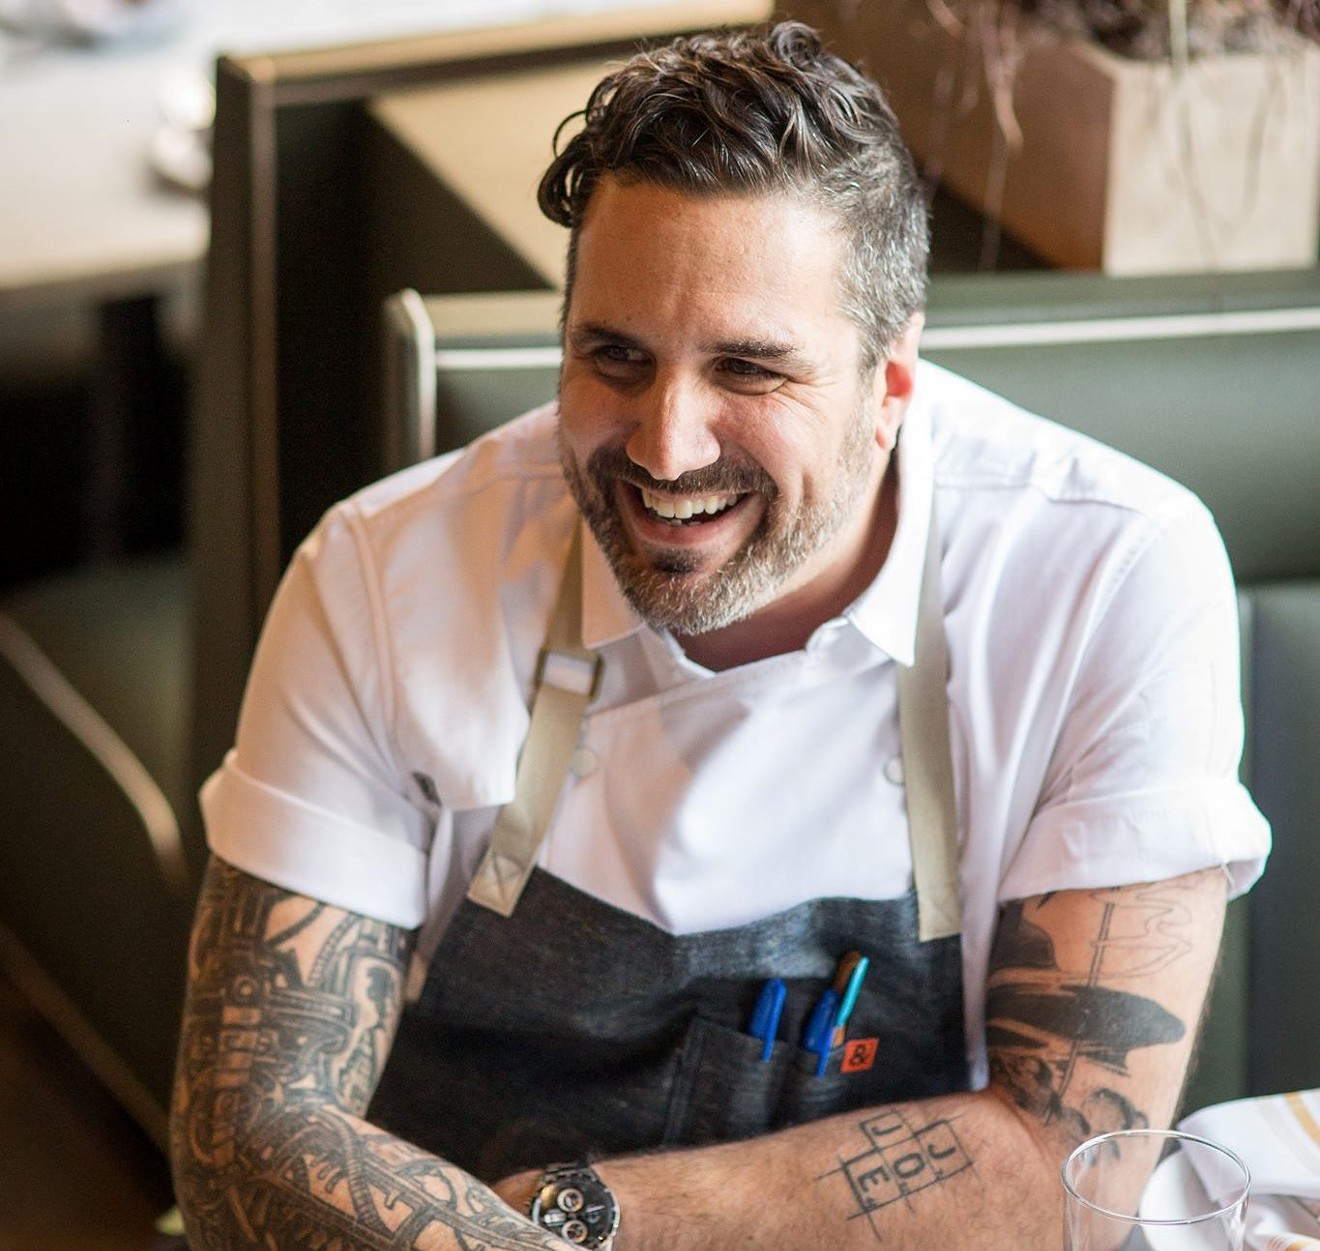 Chef Michael Scelfo brings his award-winning cooking from Cambridge, Massachusetts, to Old Major this week.